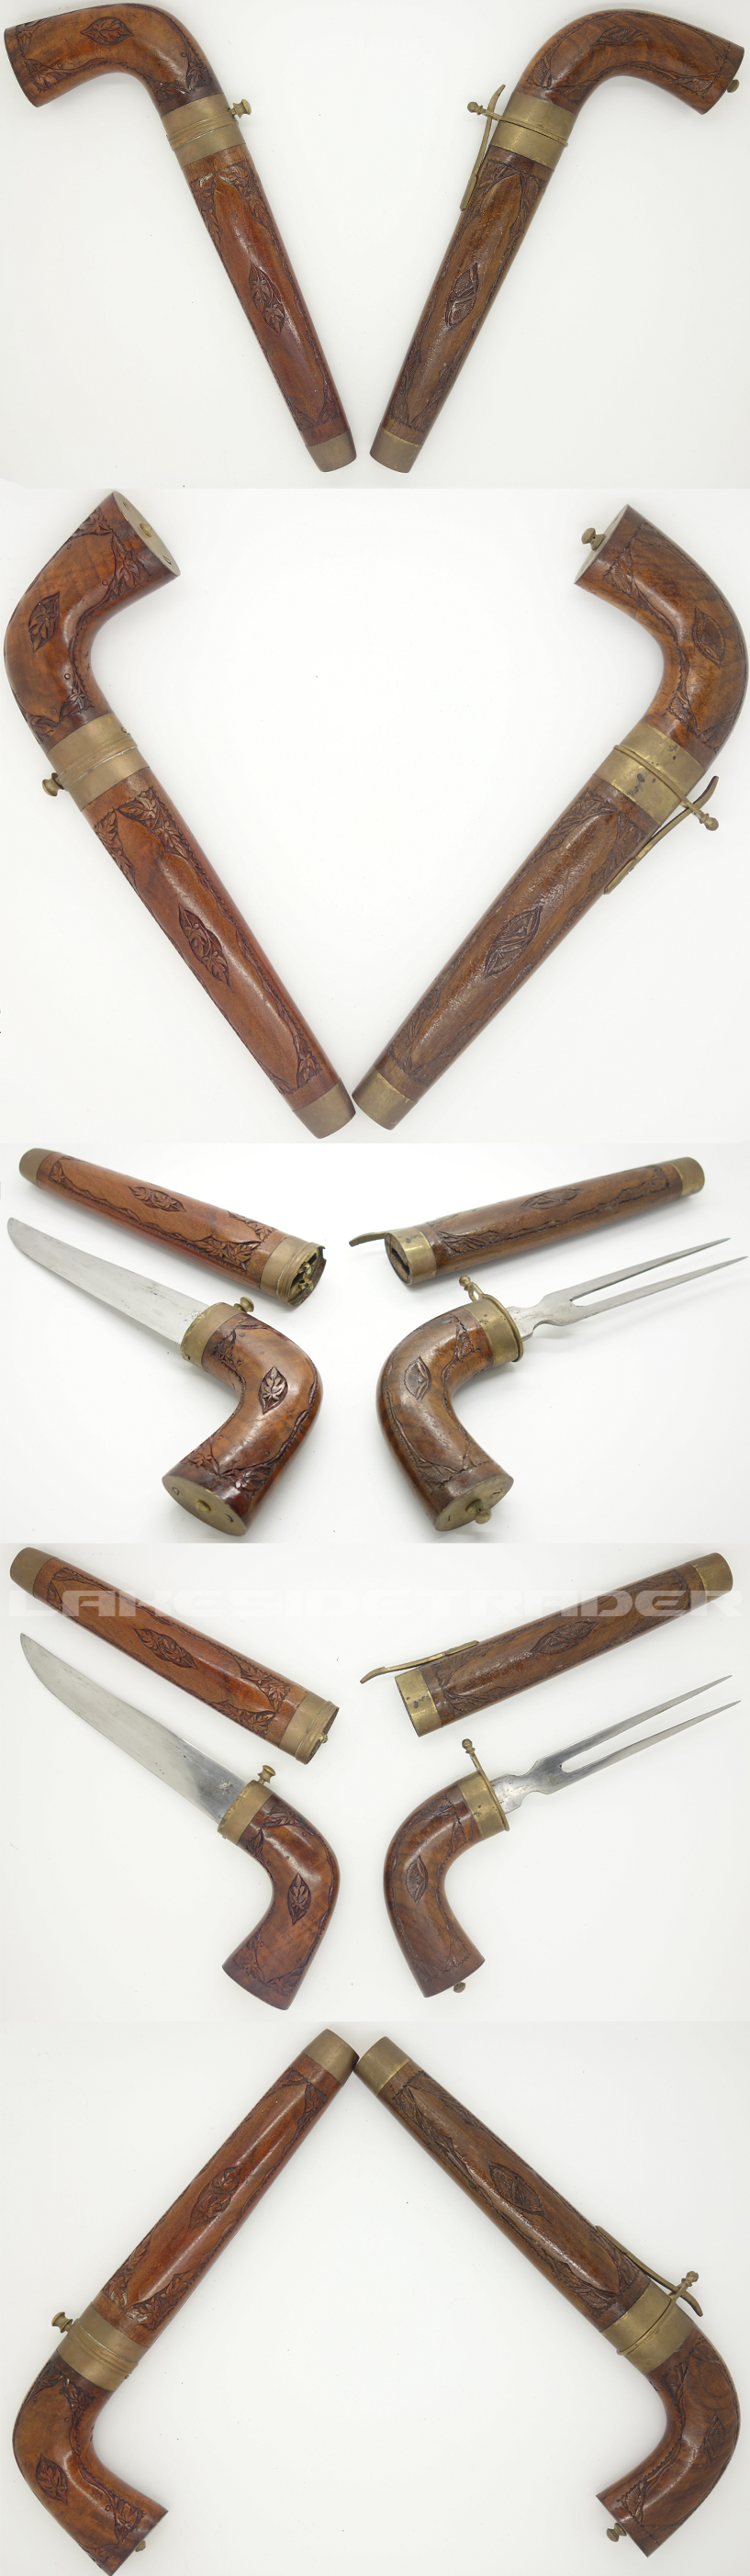 India - Dueling Pistols Carving Set 